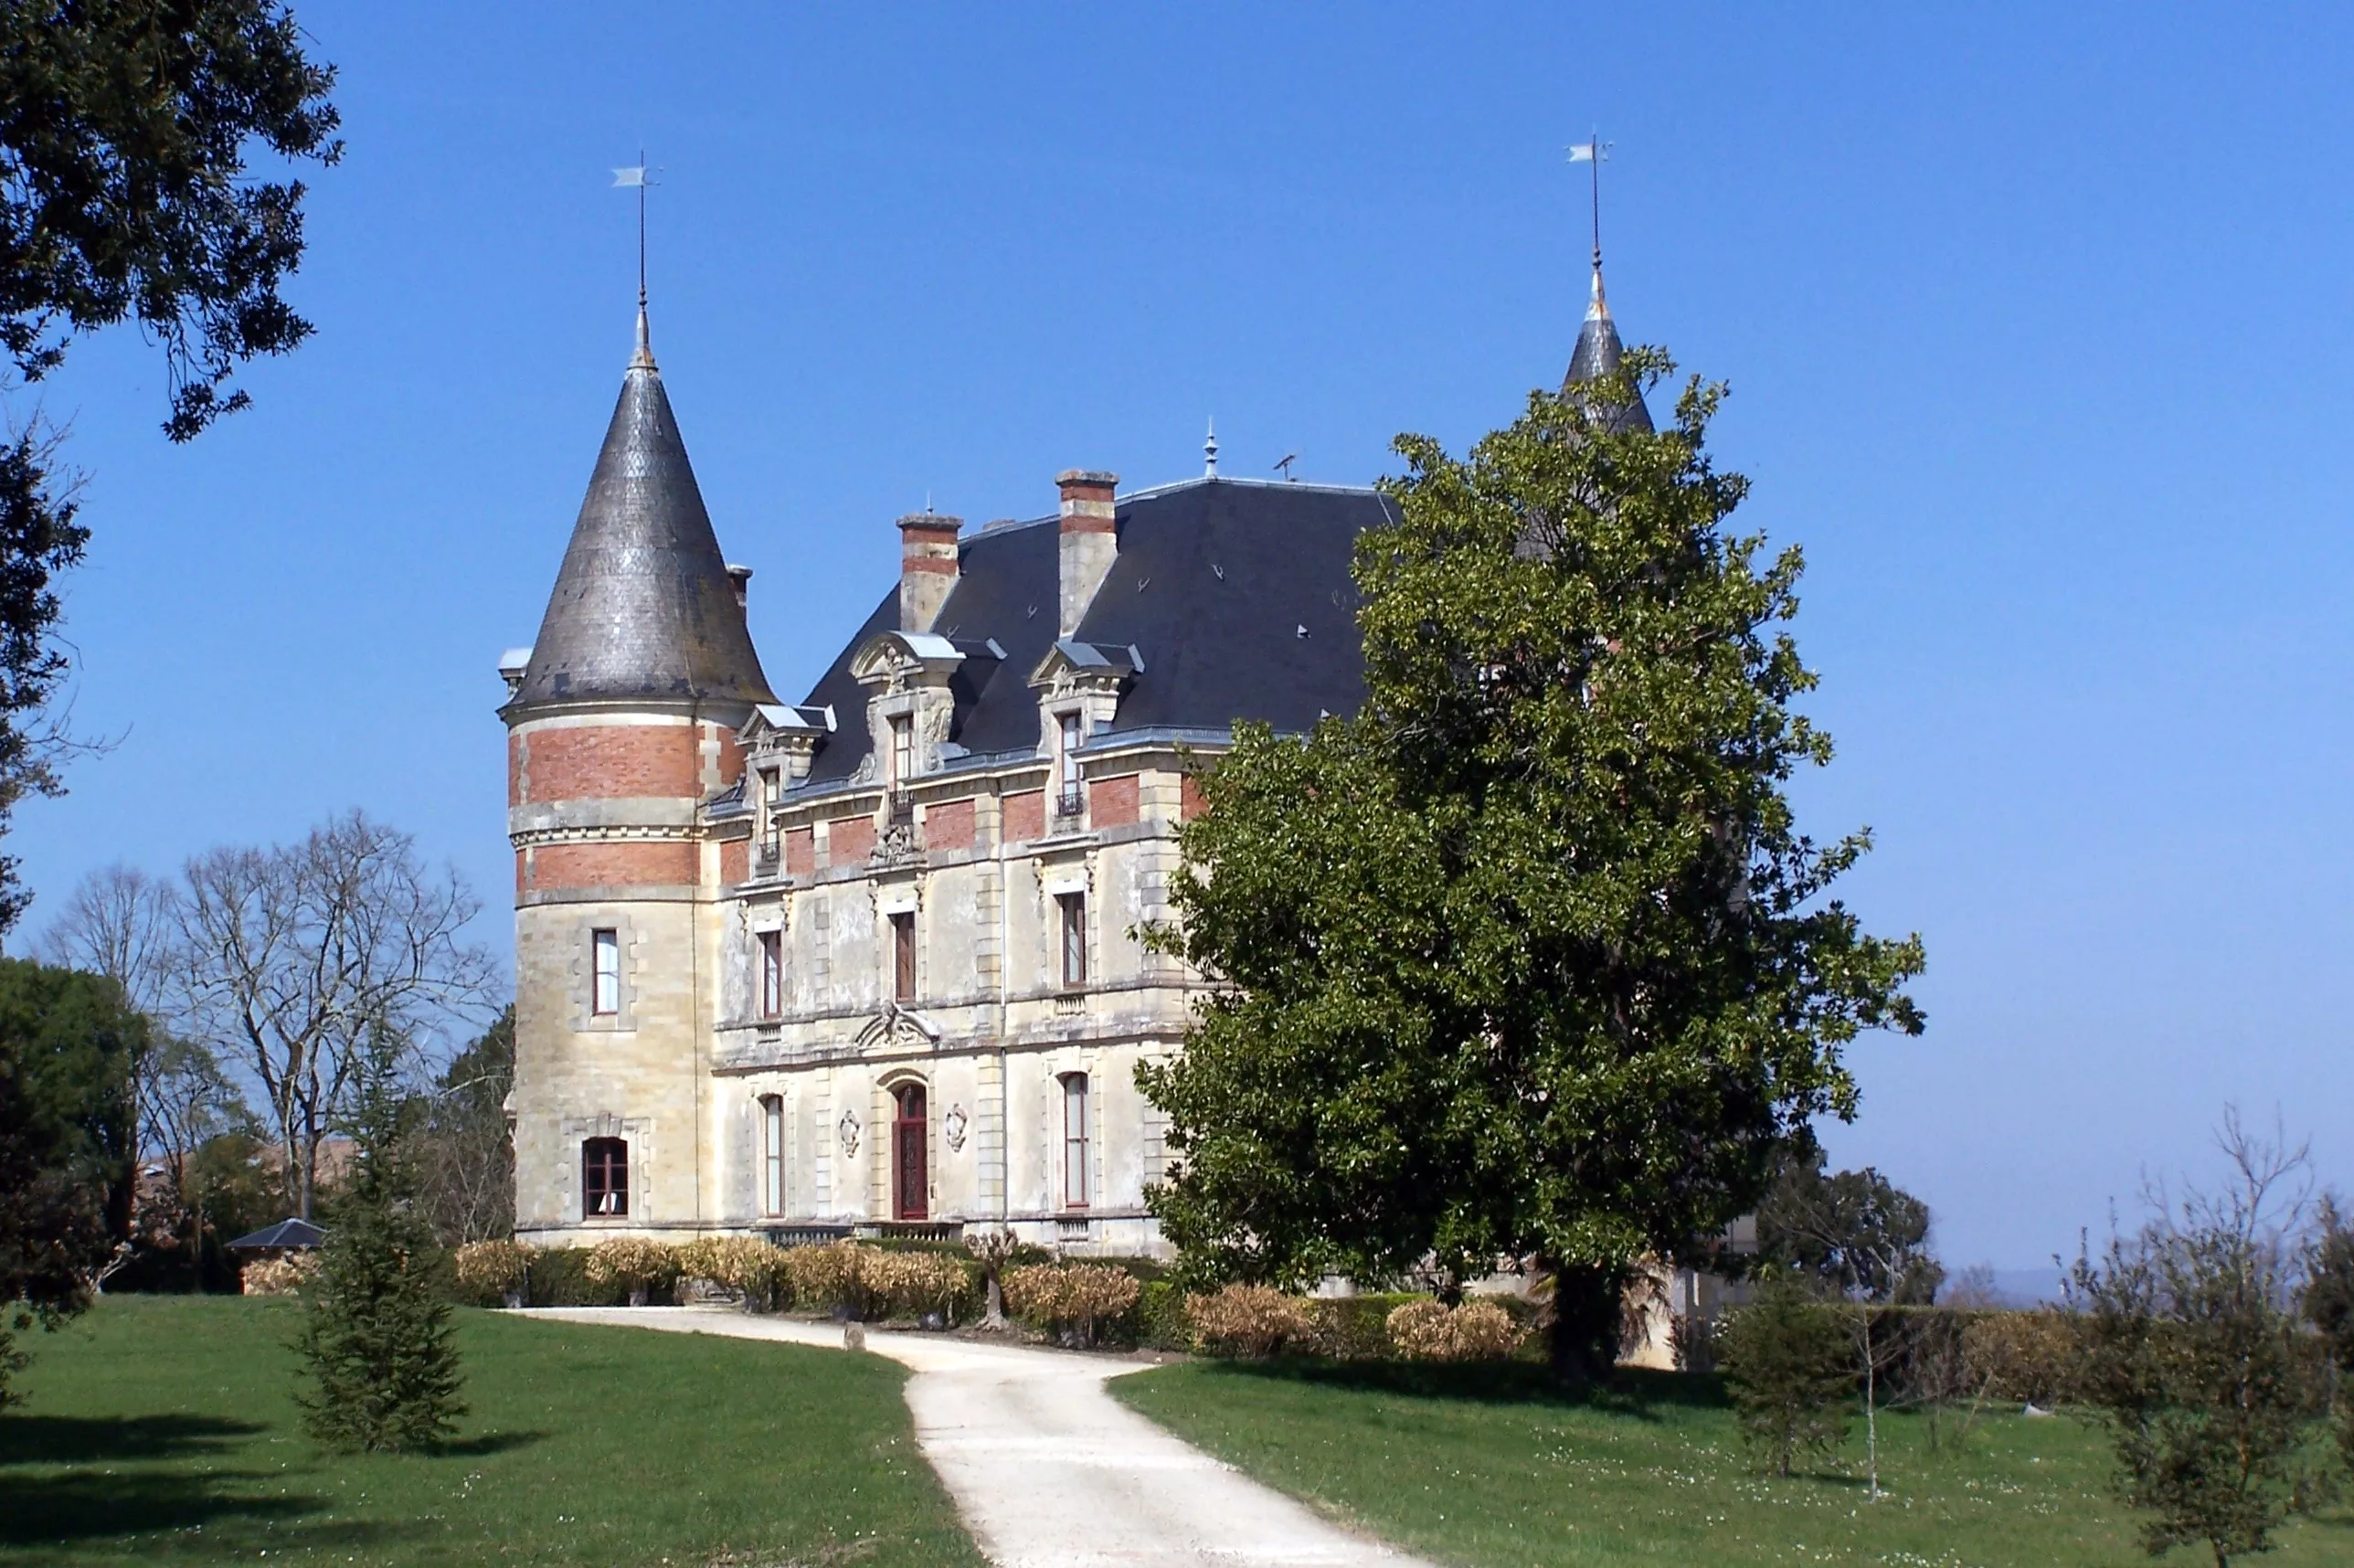 Rayne-Vigneau Castle in France, Europe | Wineries,Castles - Rated 0.9